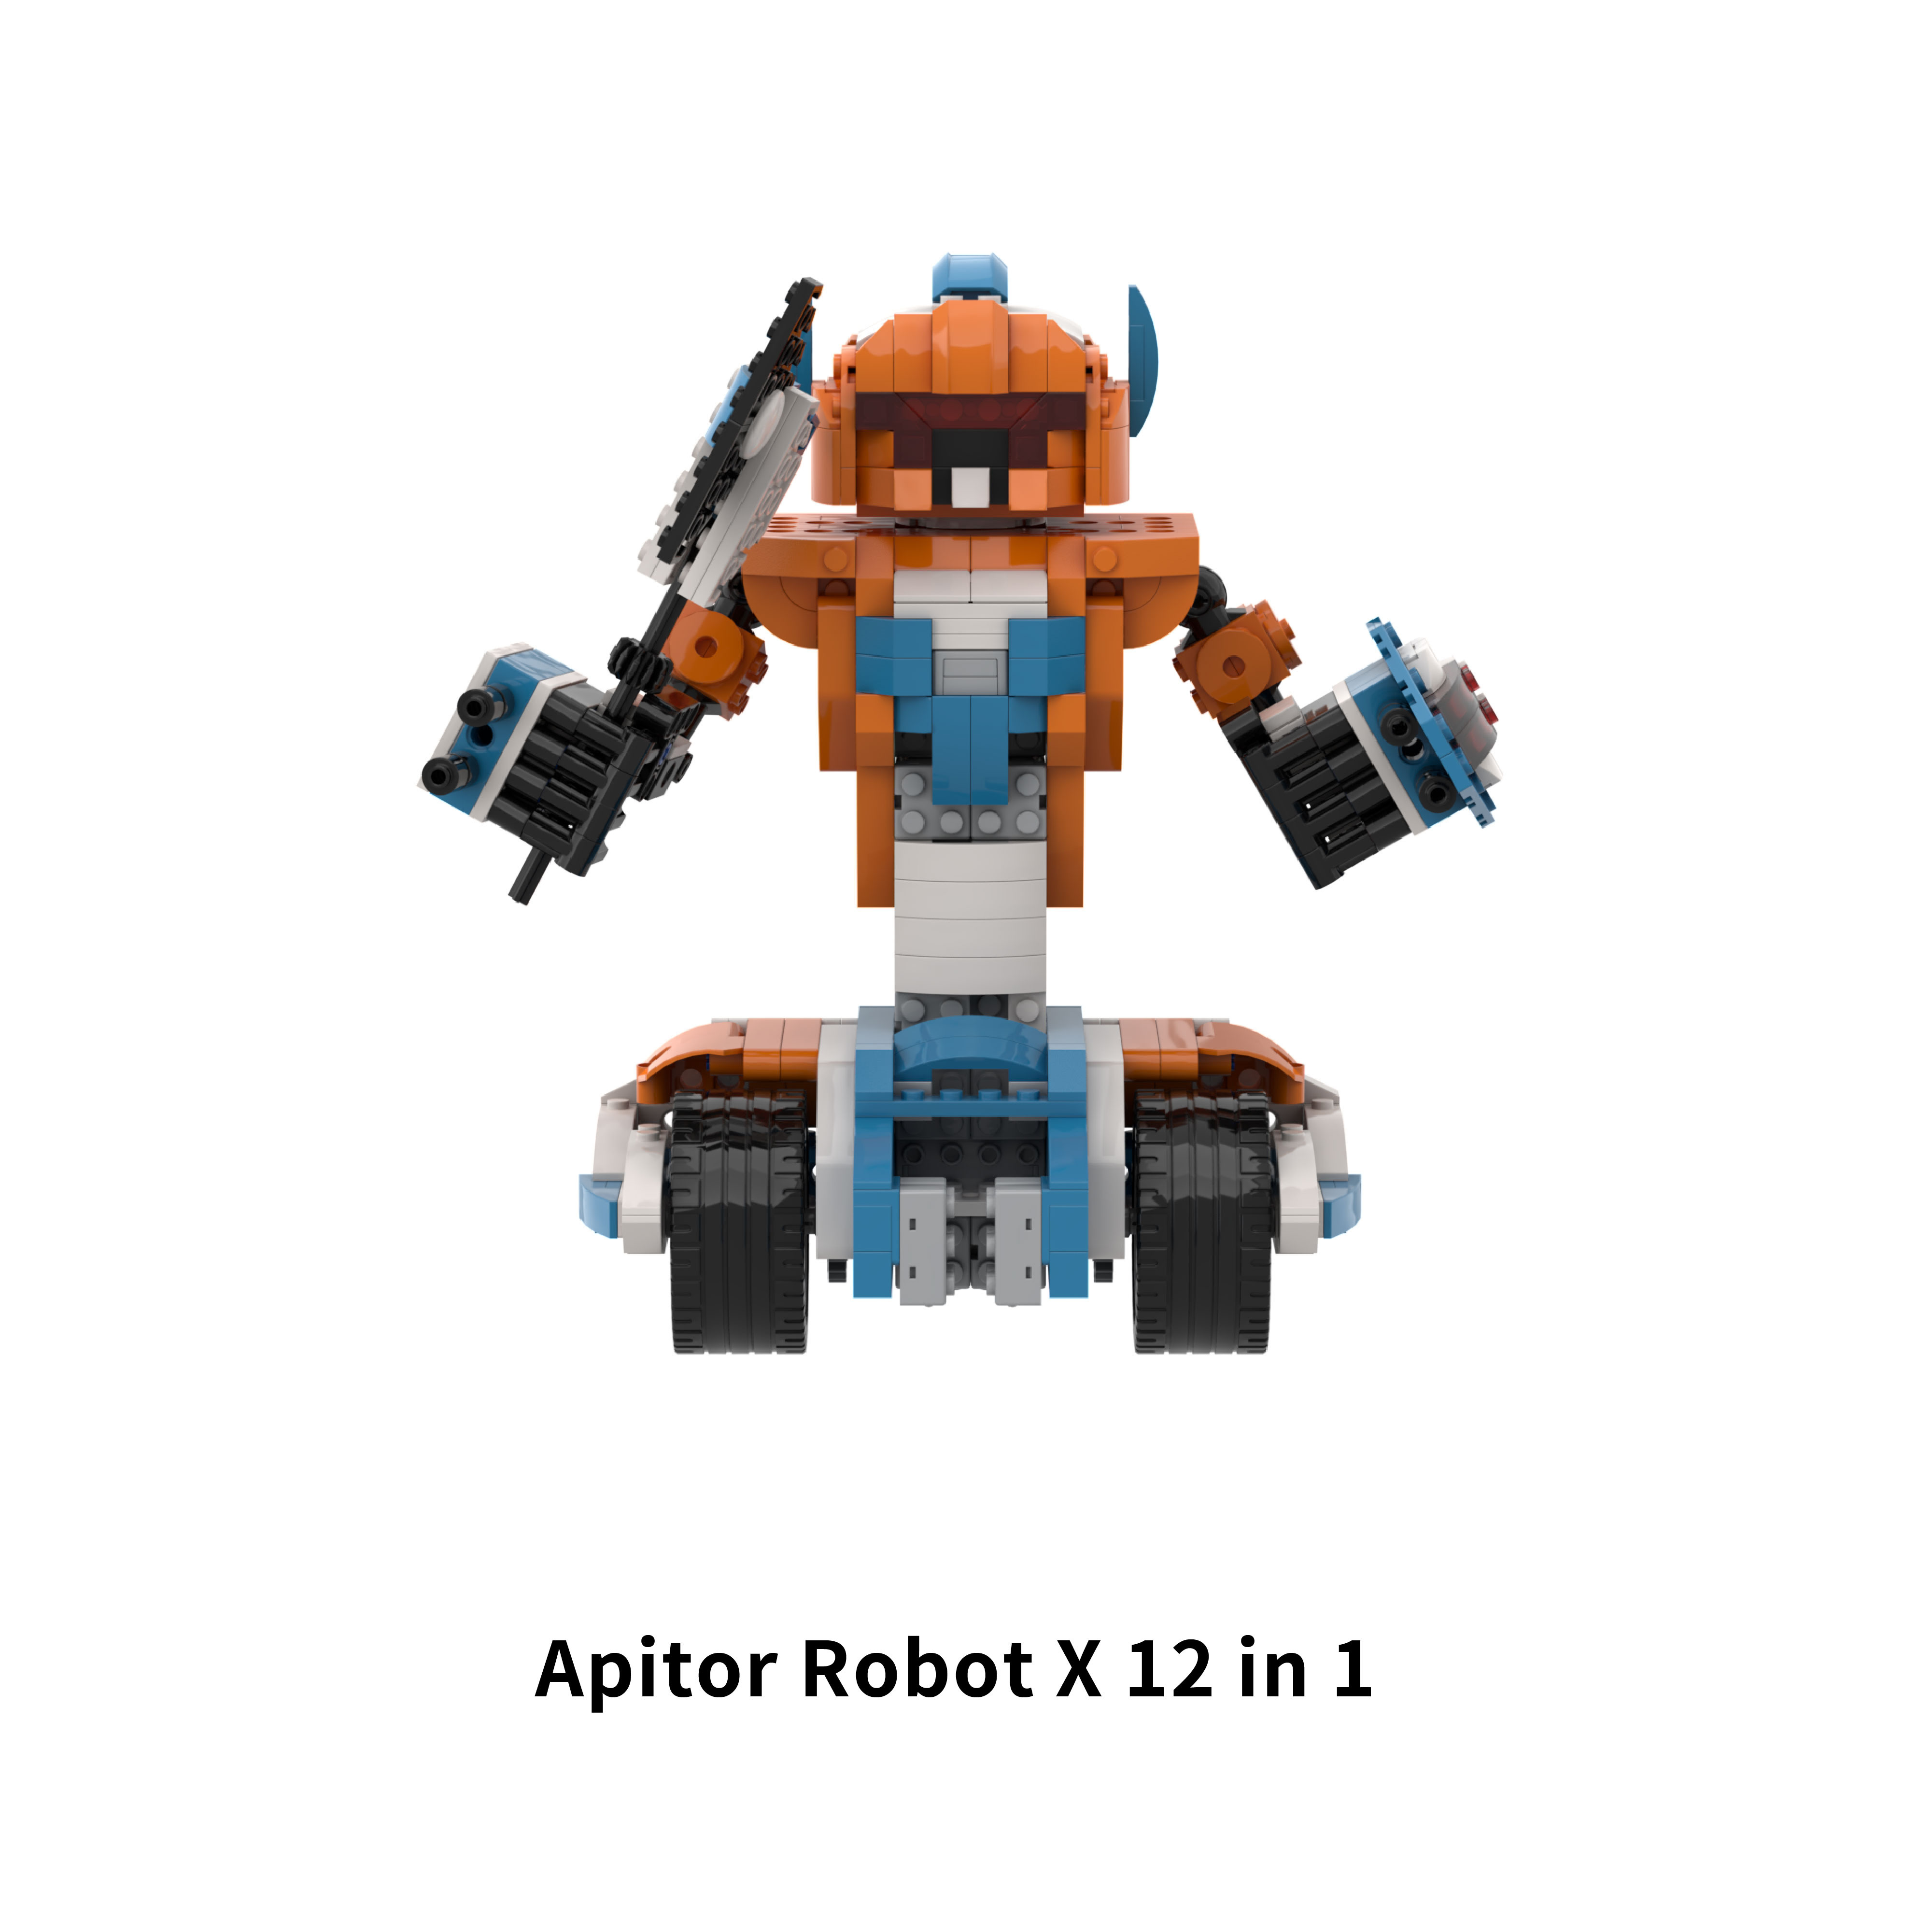 Apitor Robot X 12 in 1 